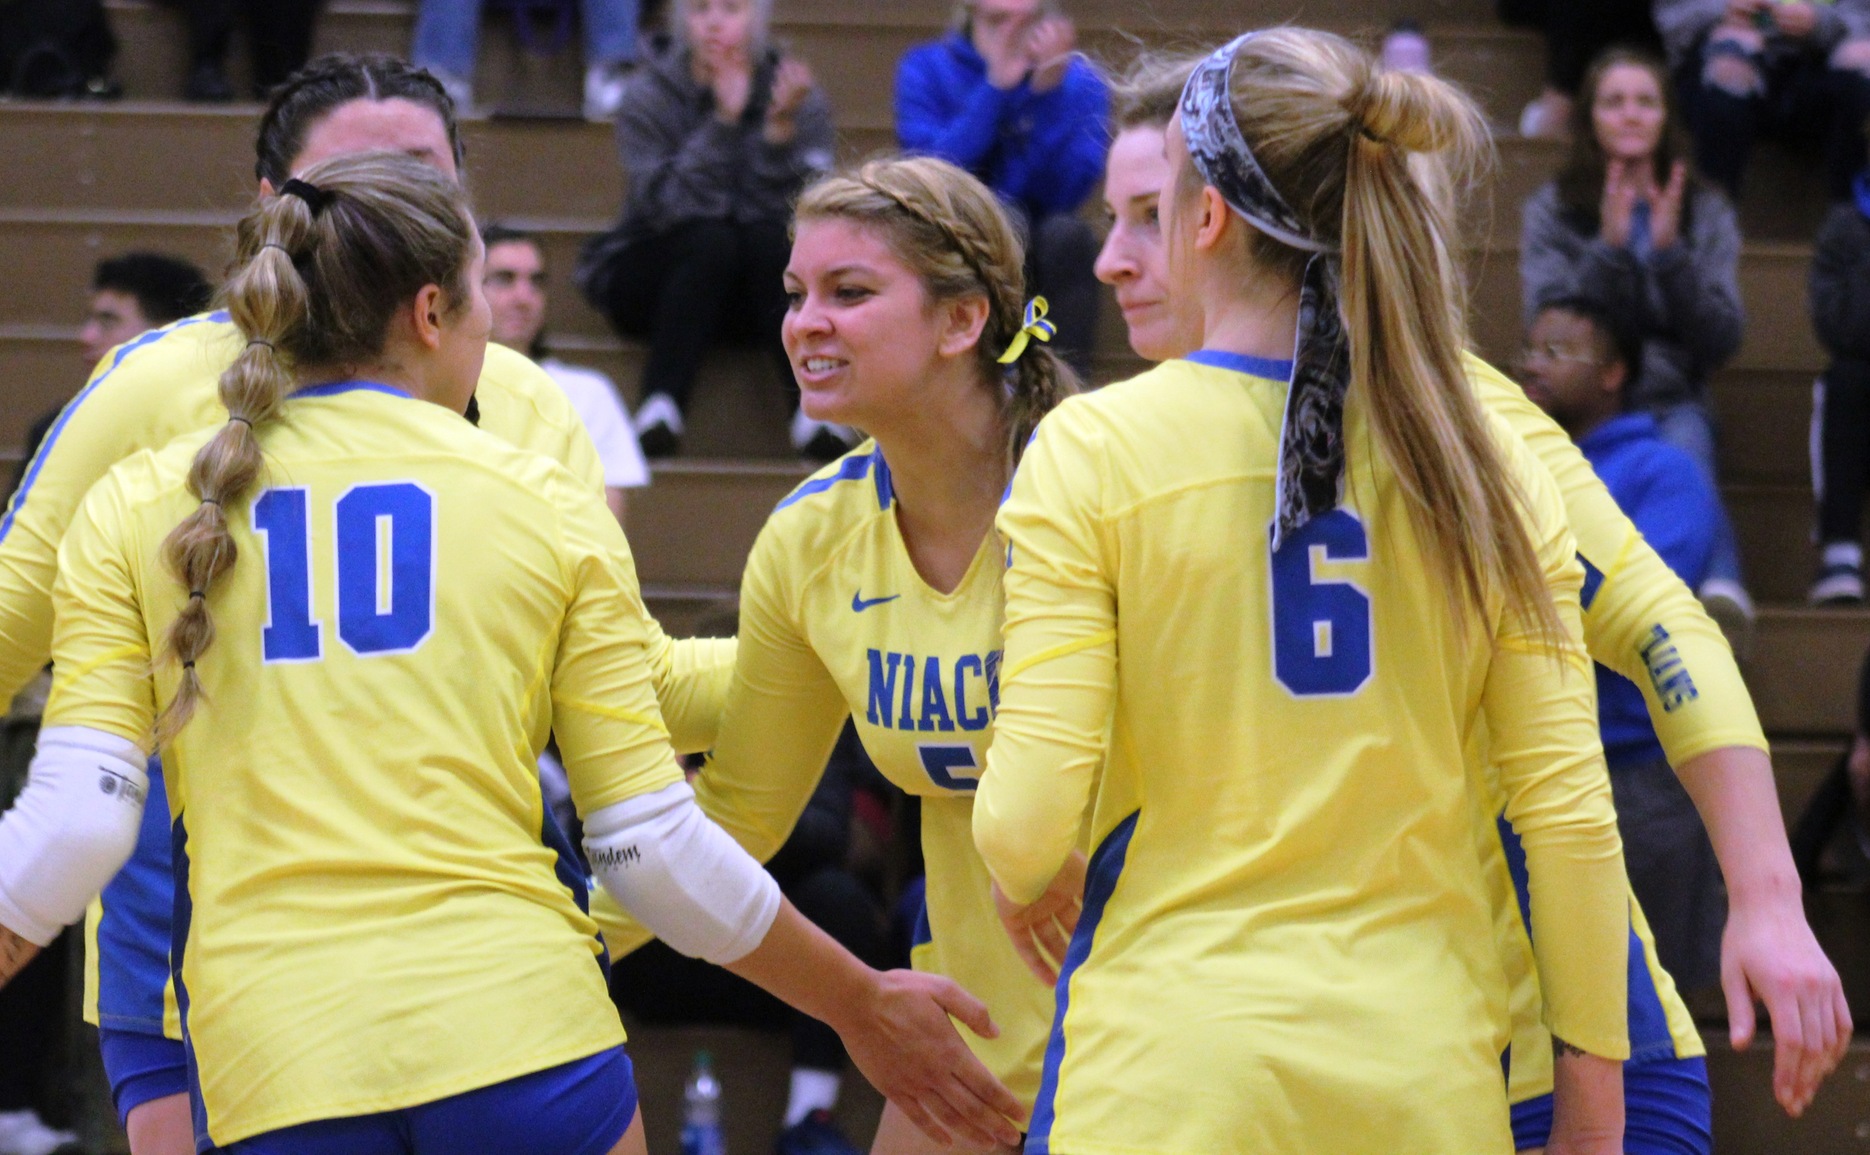 NIACC players celebrate a point in Saturday's regional tournament match against Southeastern.